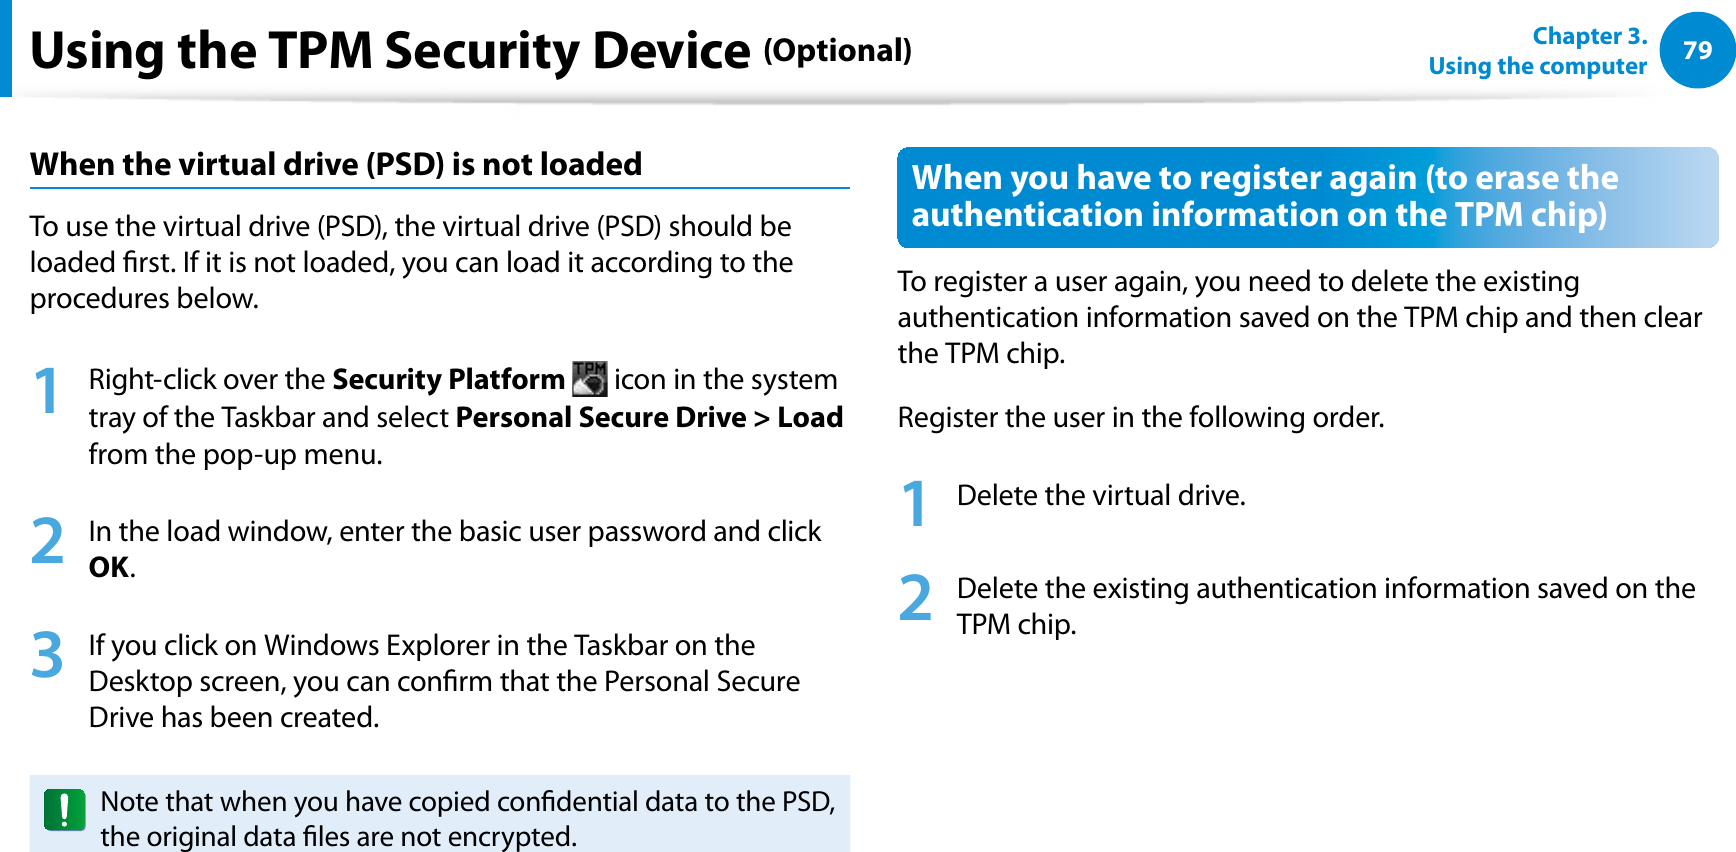 79Chapter 3.  Using the computerUsing the TPM Security Device (Optional)When the virtual drive (PSD) is not loadedTo use the virtual drive (PSD), the virtual drive (PSD) should be loaded rst. If it is not loaded, you can load it according to the procedures below.1  Right-click over the Security Platform  icon in the system tray of the Taskbar and select Personal Secure Drive &gt; Load from the pop-up menu.2  In the load window, enter the basic user password and click OK.3  If you click on Windows Explorer in the Taskbar on the Desktop screen, you can conrm that the Personal Secure Drive has been created.Note that when you have copied condential data to the PSD, the original data les are not encrypted.When you have to register again (to erase the authentication information on the TPM chip)To register a user again, you need to delete the existing authentication information saved on the TPM chip and then clear the TPM chip.Register the user in the following order.1  Delete the virtual drive.2  Delete the existing authentication information saved on the TPM chip.